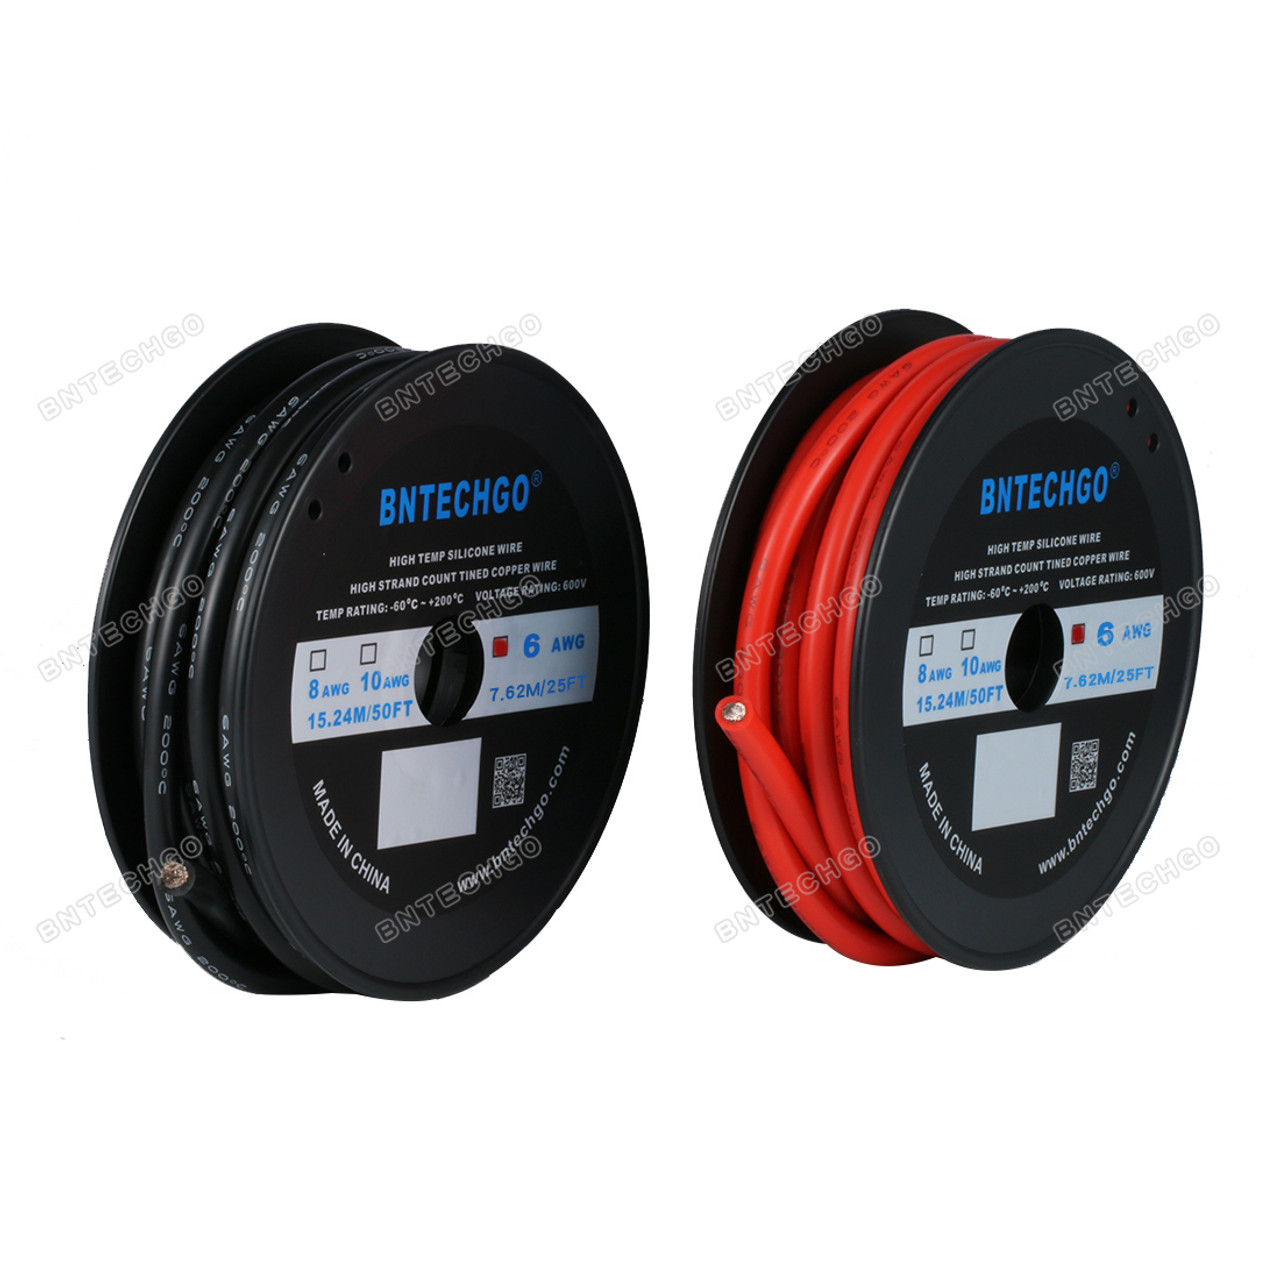 BNTECHGO 22 Gauge Silicone Wire 10 ft Red and 10 ft Black Flexible 22 AWG Str